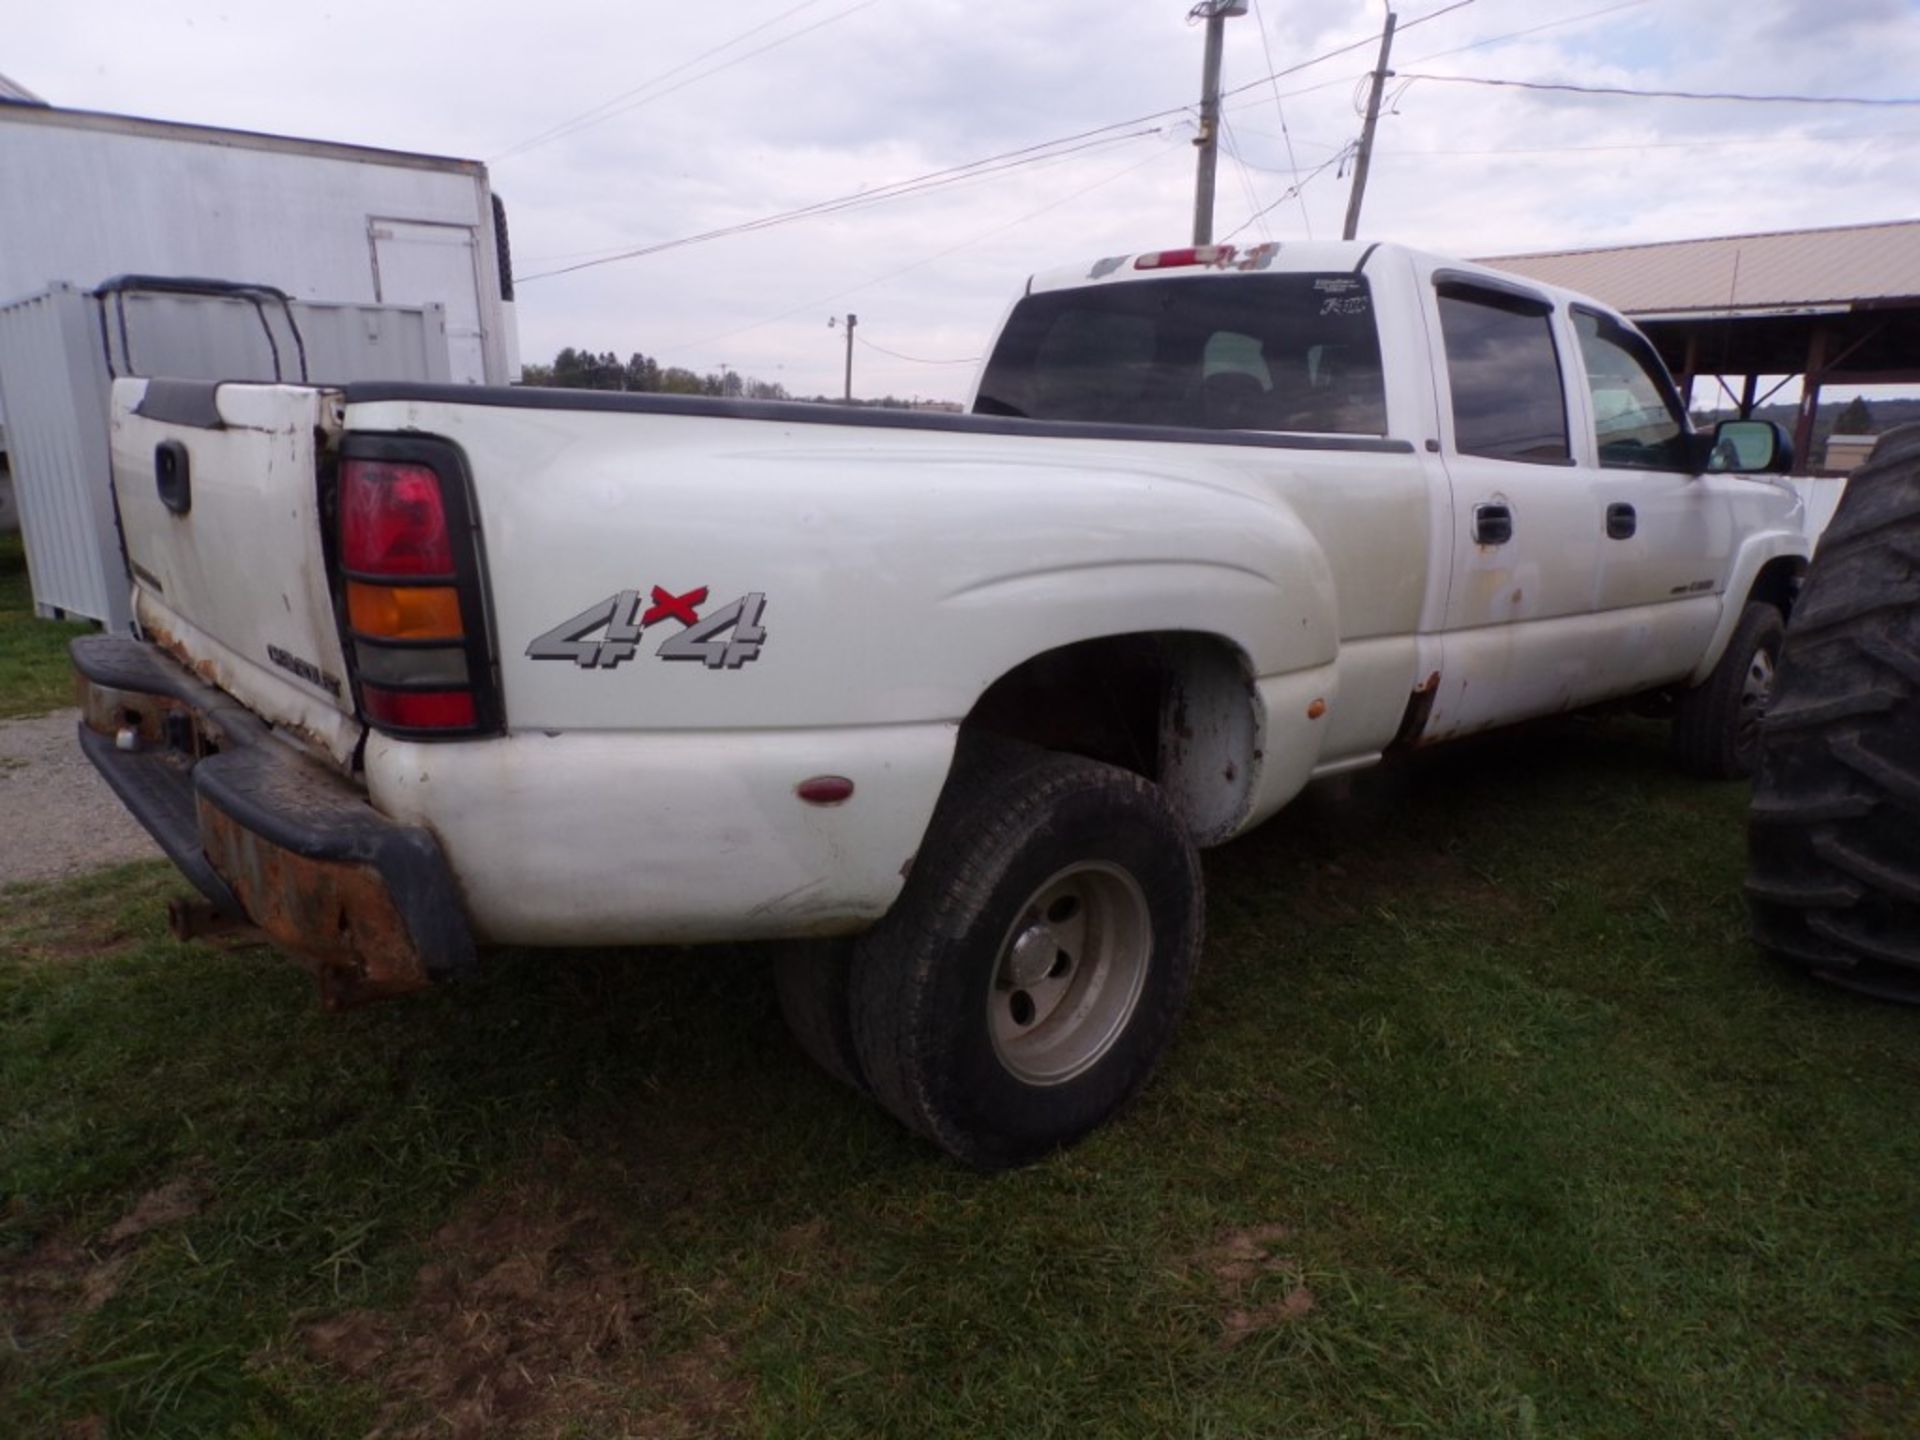 2005 Chevrolet 3500 Dually, 4WD, Duramax Dsl Eng, Vin# 1GCJK332X5F970276 - HAVE TITLE (463) - Image 4 of 7